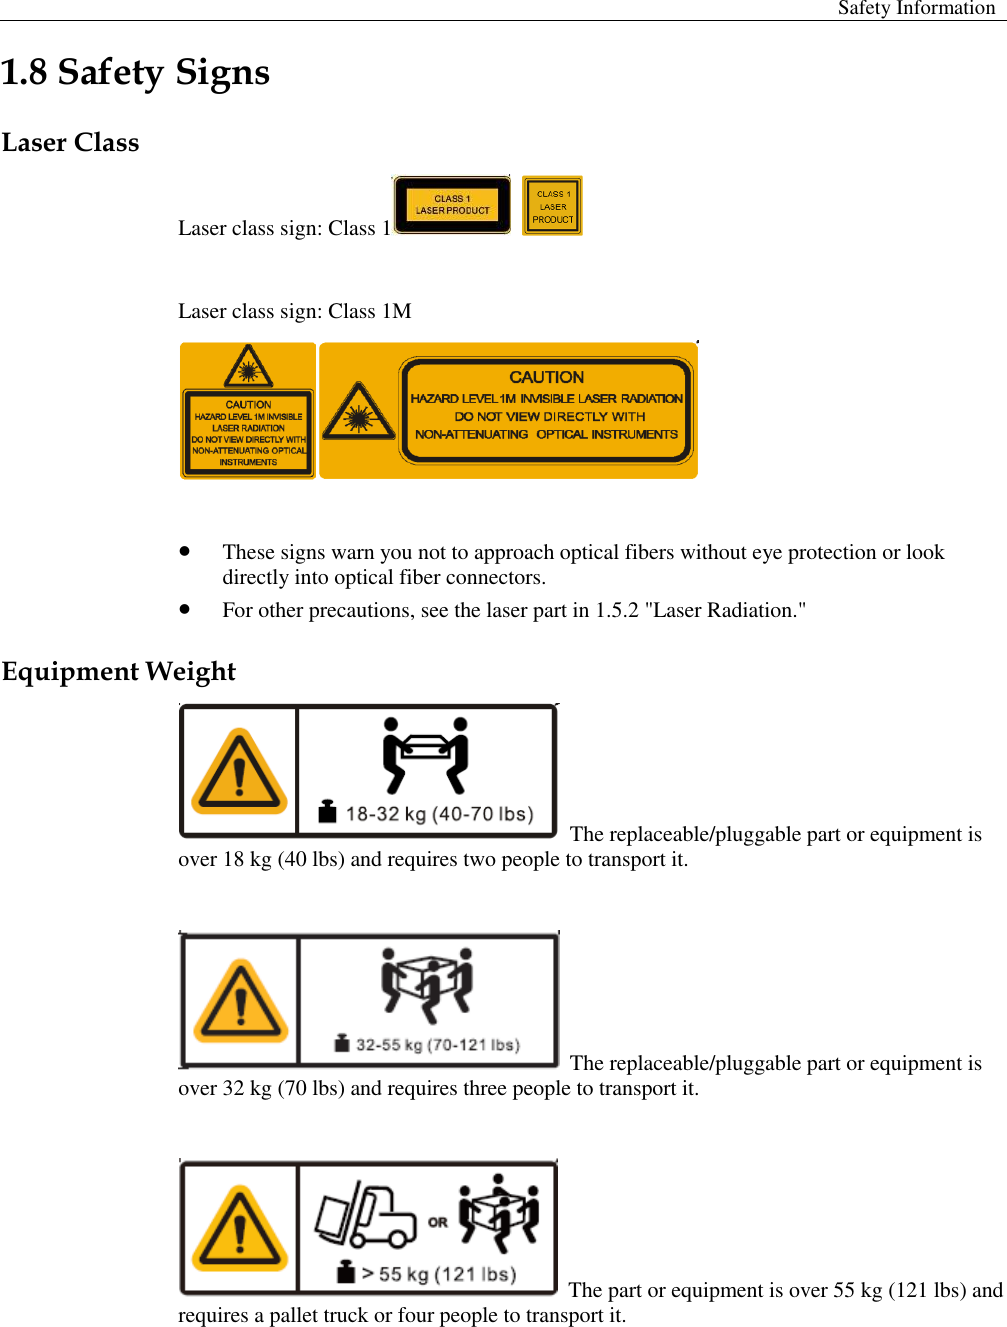  Safety Information  1.8 Safety Signs   Laser Class Laser class sign: Class 1     Laser class sign: Class 1M    These signs warn you not to approach optical fibers without eye protection or look directly into optical fiber connectors.    For other precautions, see the laser part in 1.5.2 &quot;Laser Radiation.&quot;   Equipment Weight  The replaceable/pluggable part or equipment is over 18 kg (40 lbs) and requires two people to transport it.     The replaceable/pluggable part or equipment is over 32 kg (70 lbs) and requires three people to transport it.     The part or equipment is over 55 kg (121 lbs) and requires a pallet truck or four people to transport it.   